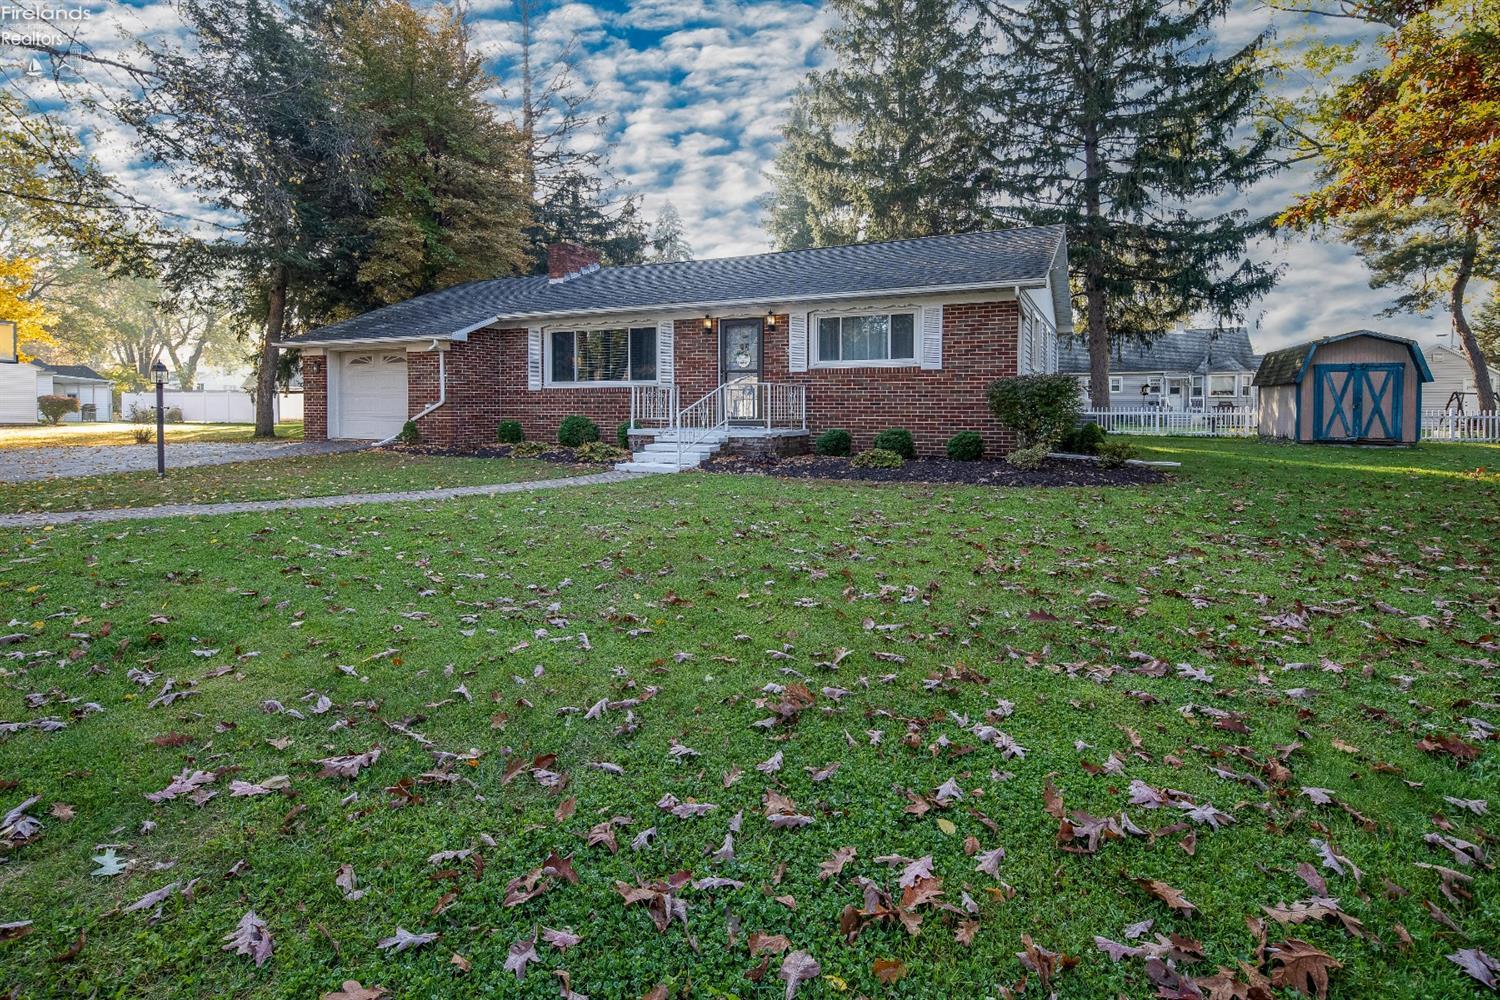 156 Woodland Place, Clyde, OH 43410